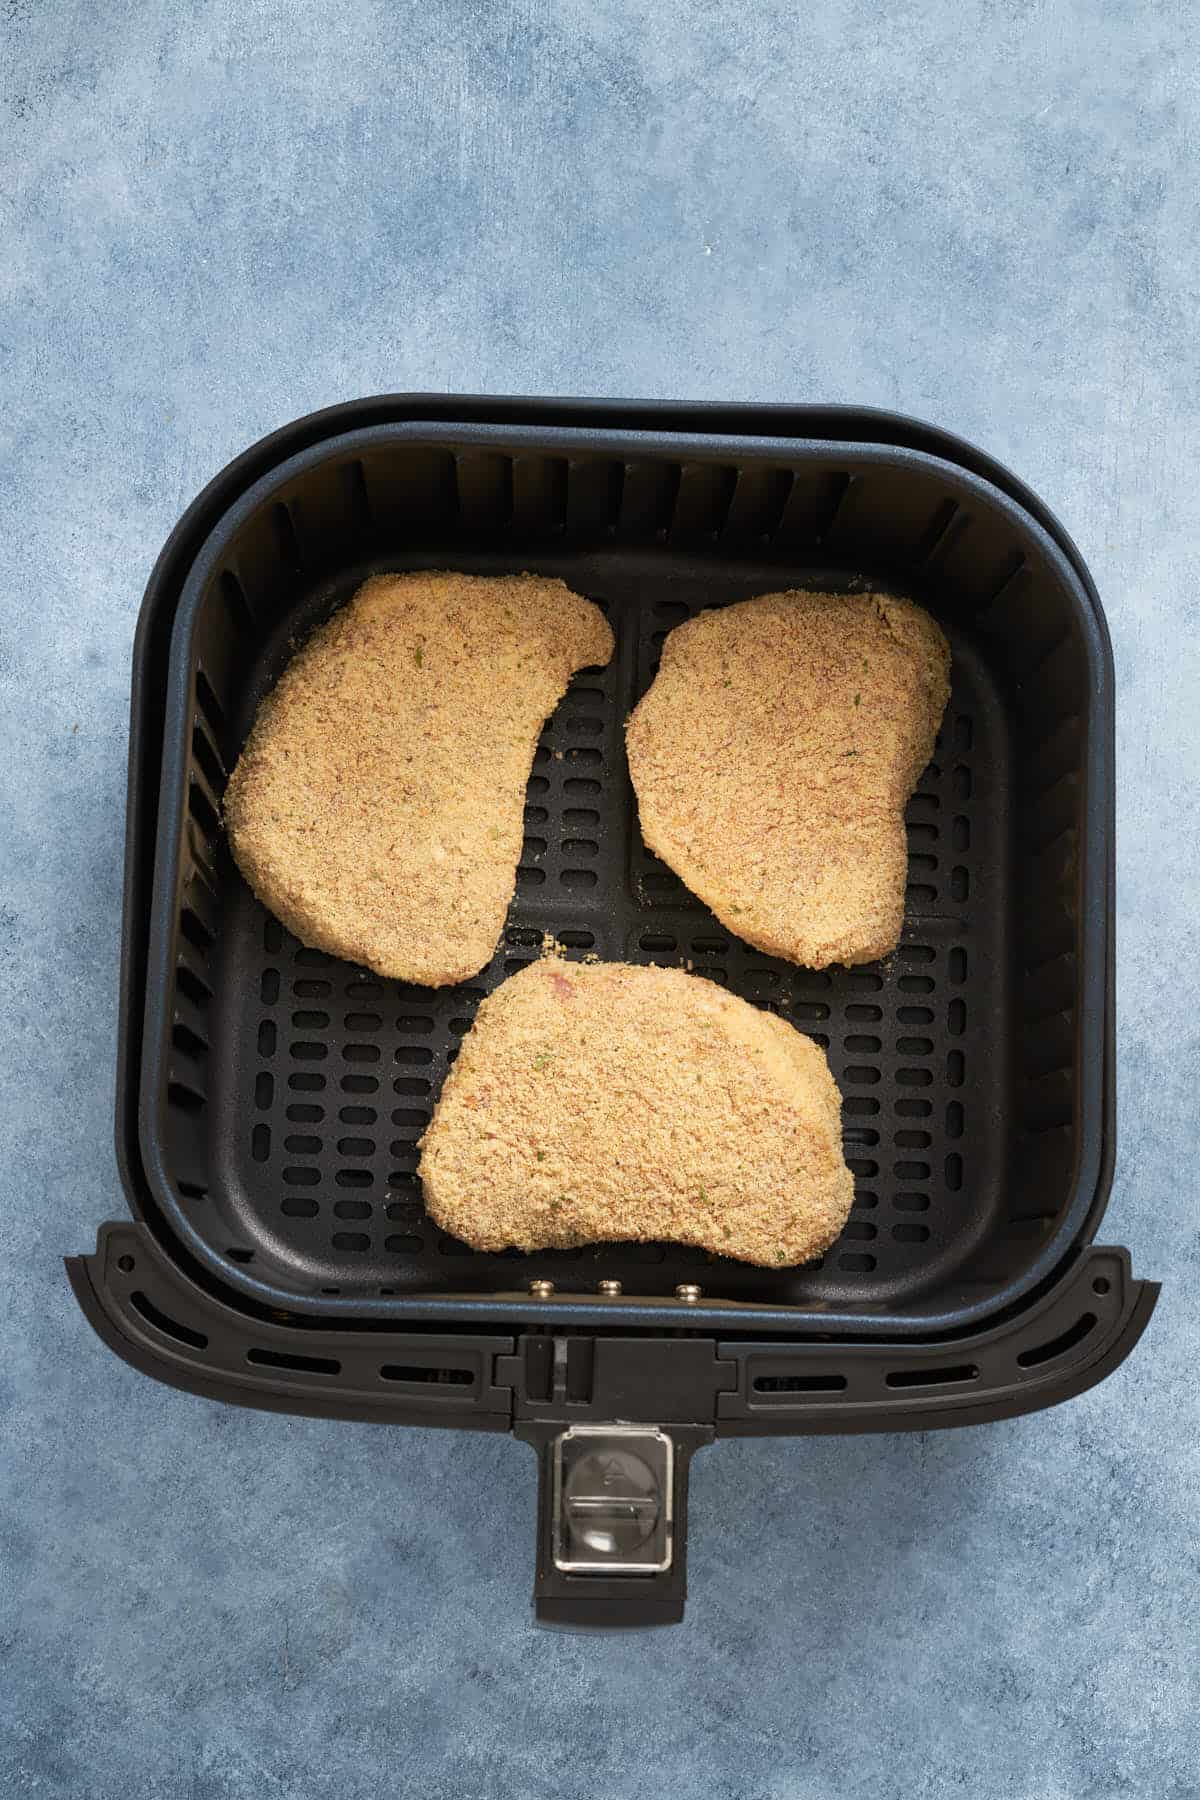 Breaded pork chops before spraying with oil in the air fryer basket.